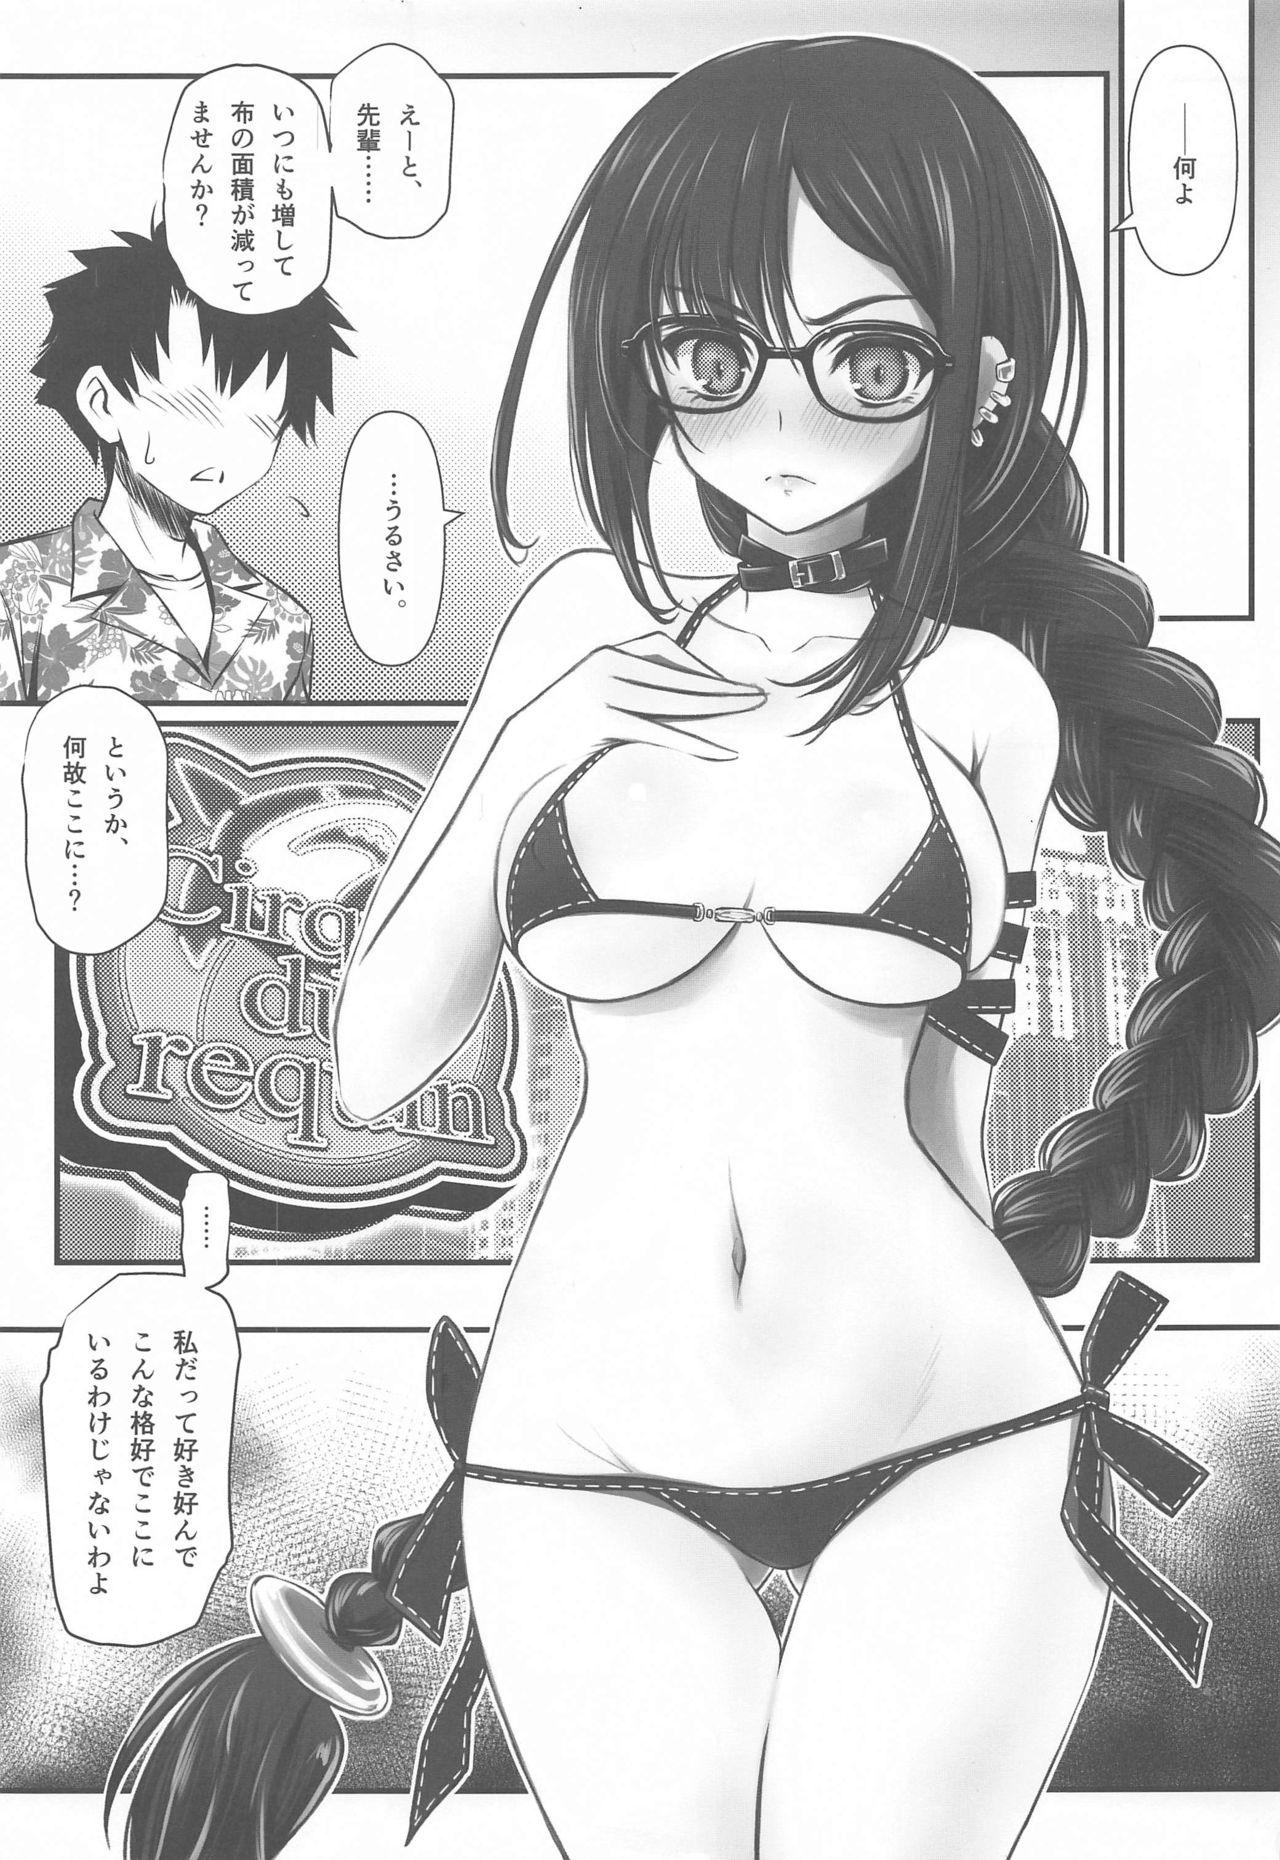 Asslick [Yakan Honpo (Inoue Tommy)] Megane Senpai Onee-chan - FGO Cute Glasses Sister(s) (Fate/Grand Order) - Fate grand order Sex Tape - Page 2